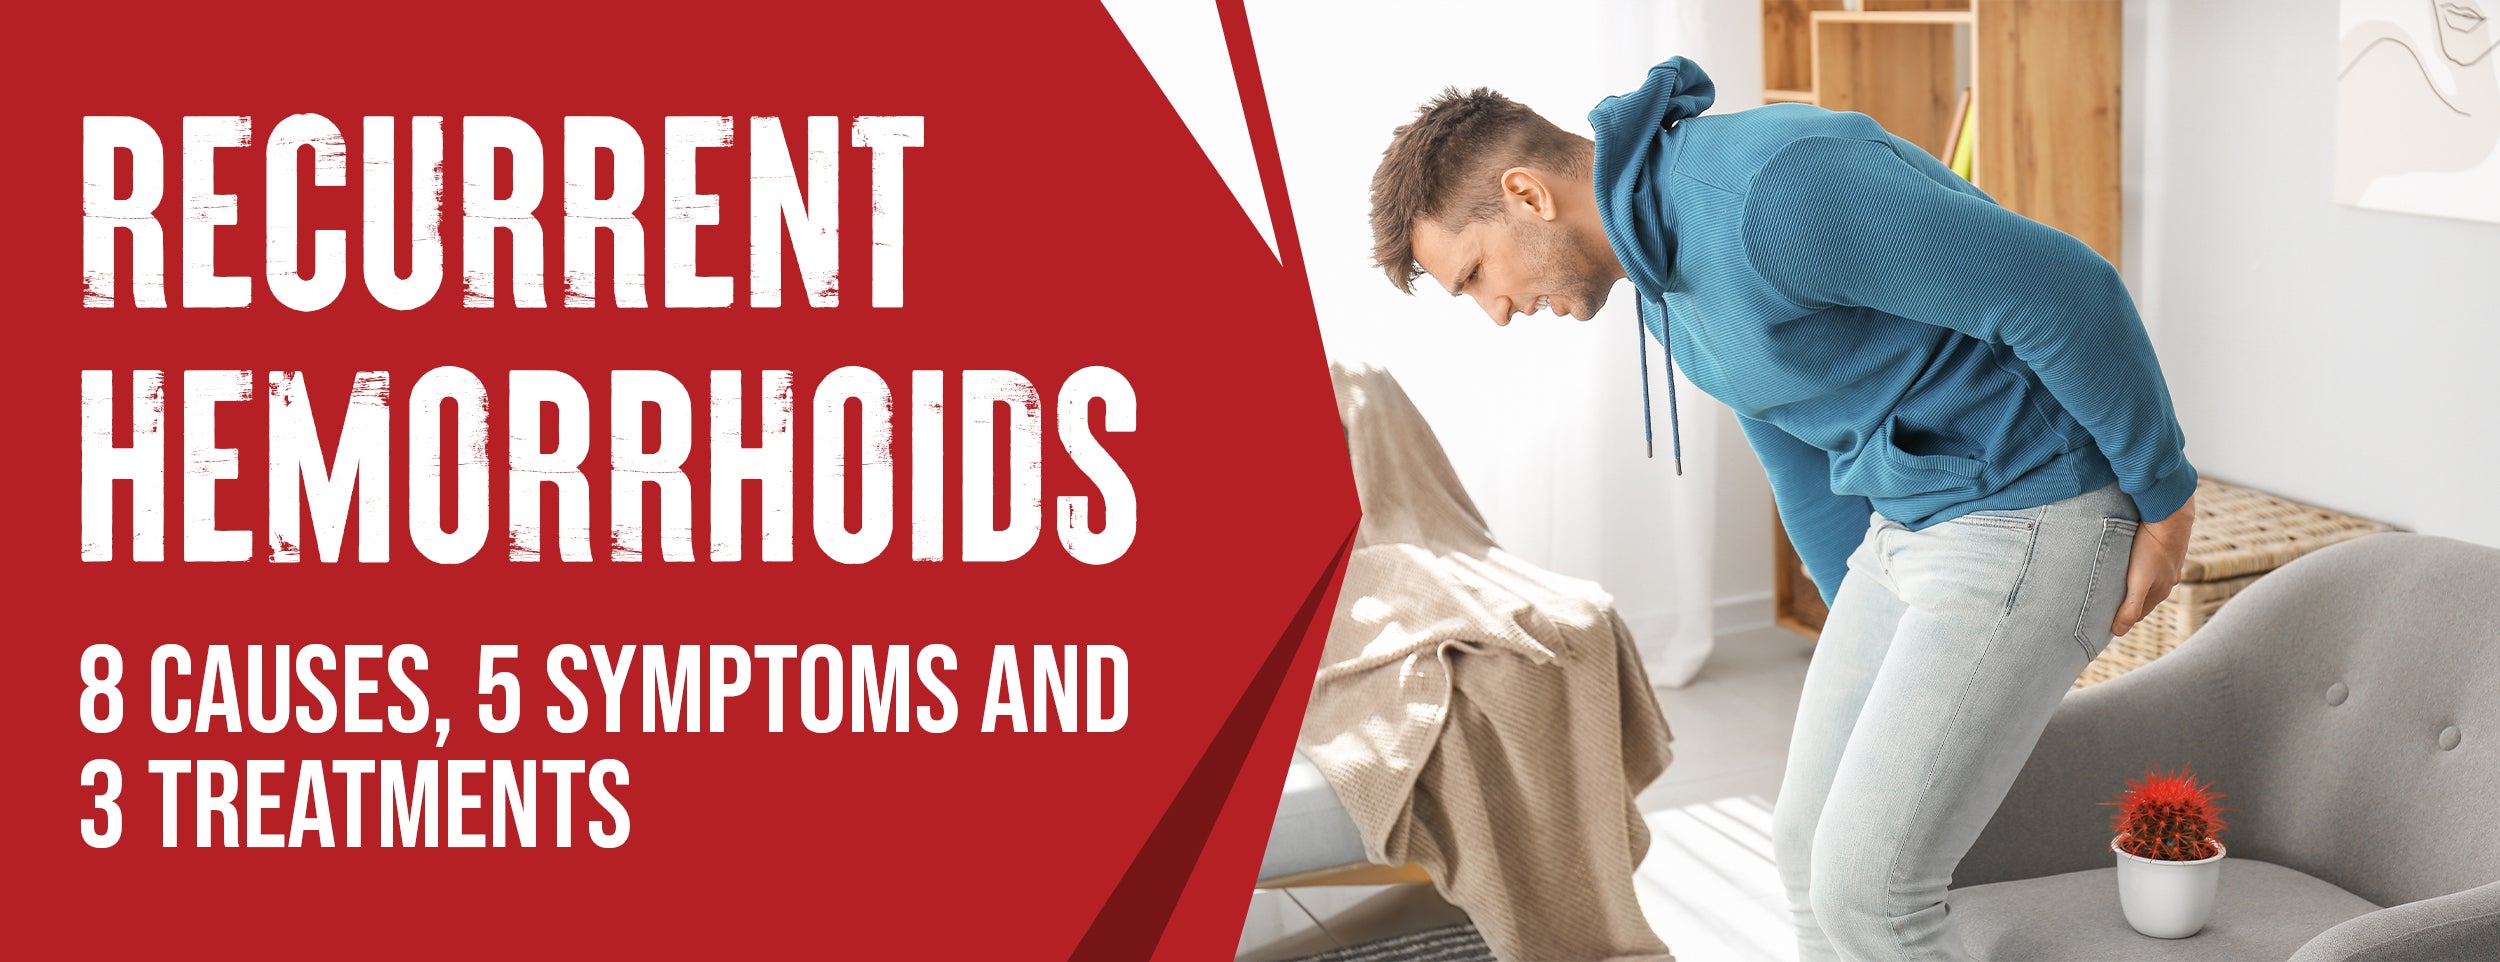 There are eight causes and five symptoms of recurrent hemorrhoids [treatments].